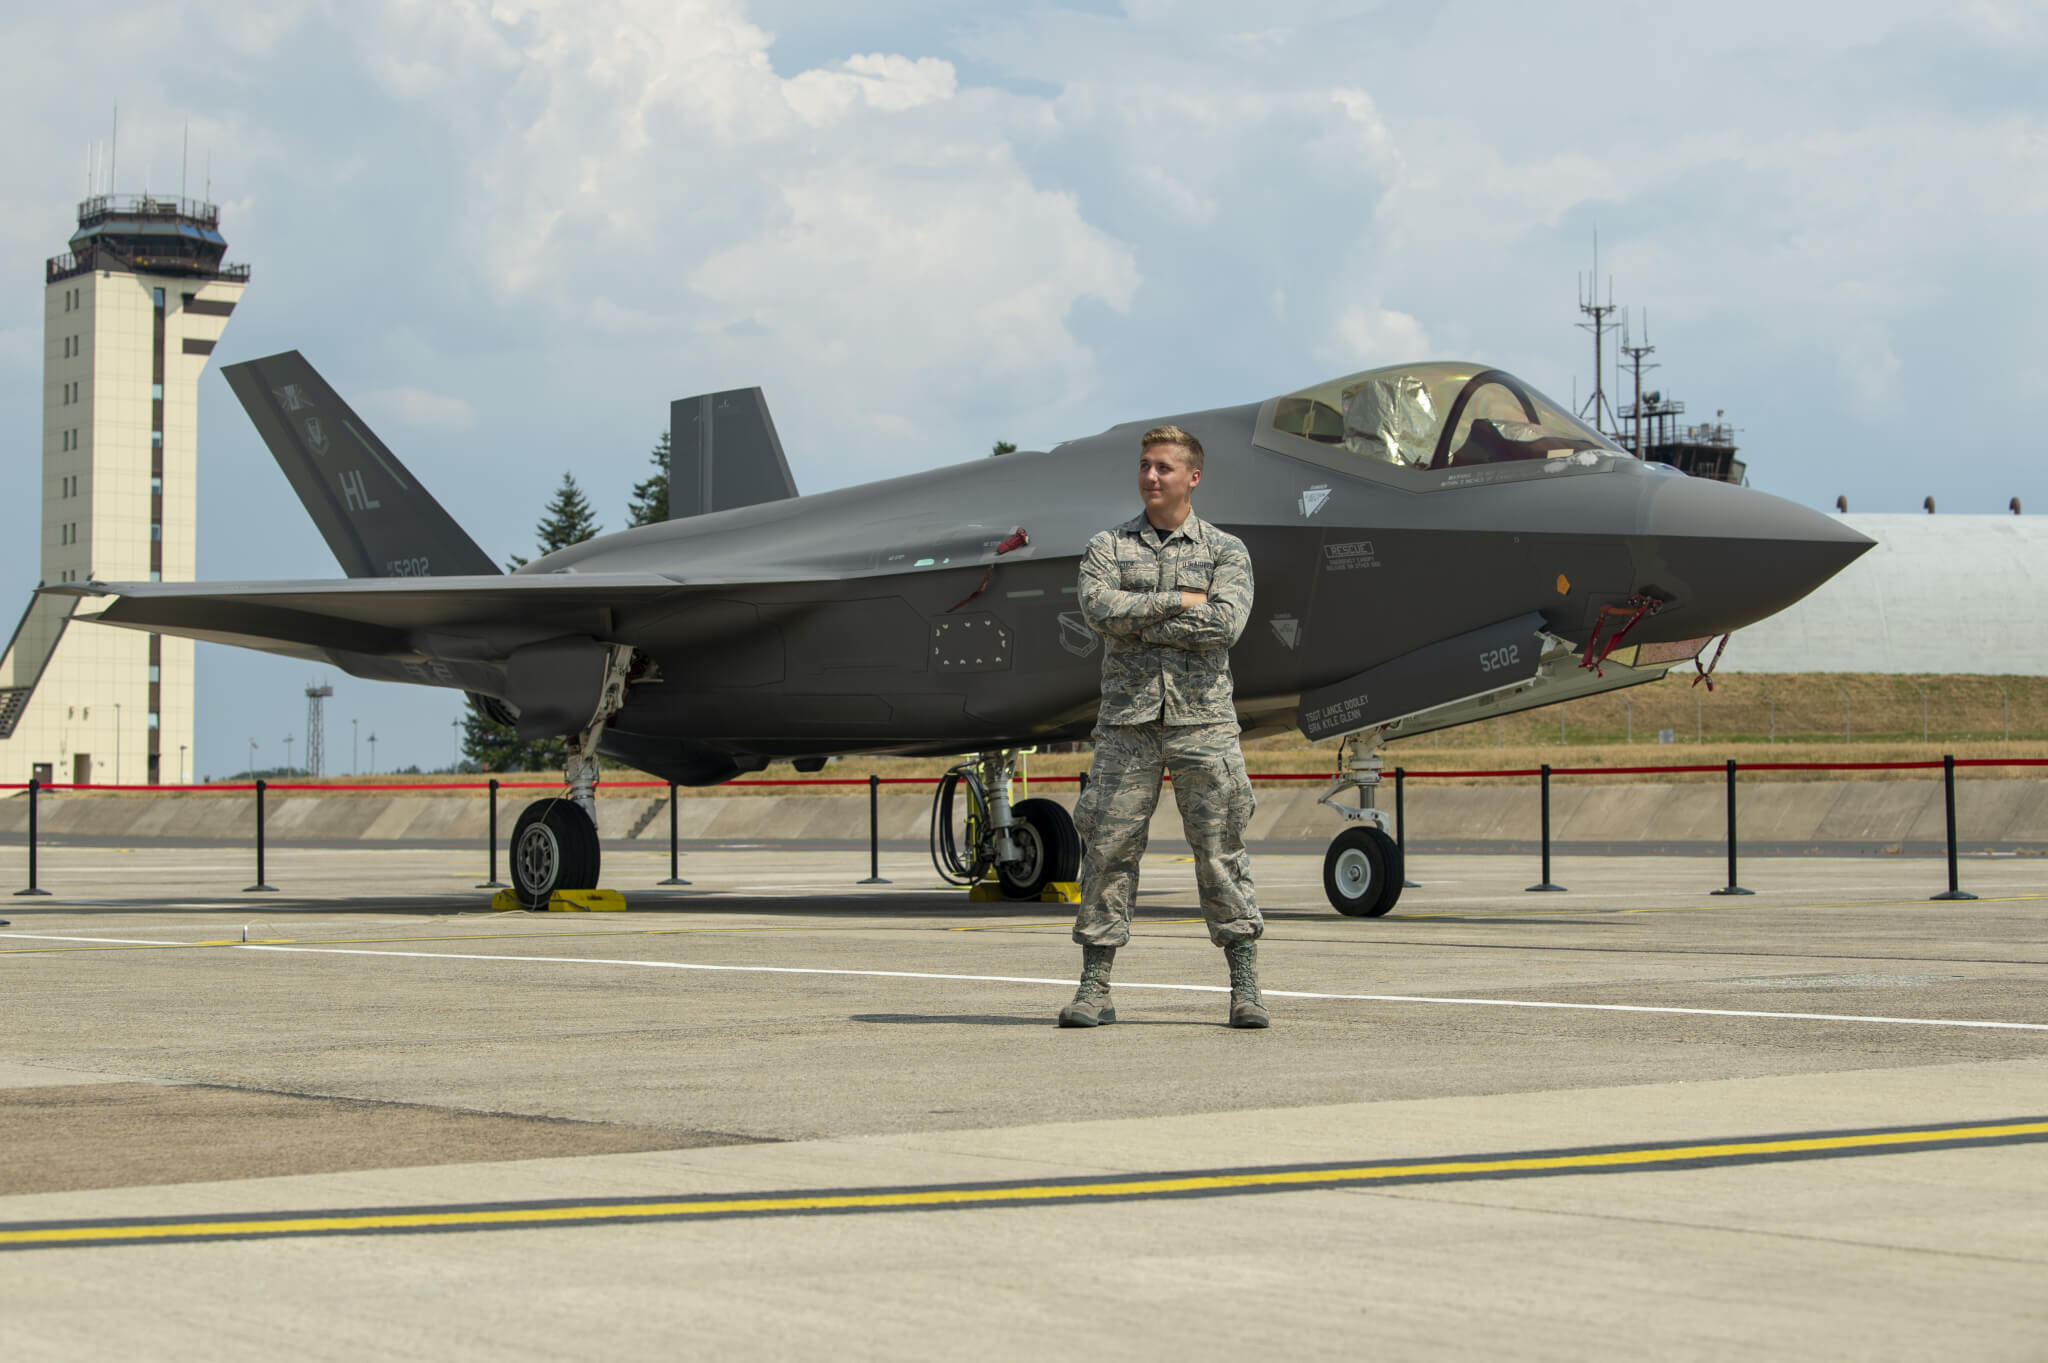 Senior Airman Colby Cook is a F-35 crew chief in the Air Force Reserve. Photo by  Airman 1st Class Branden Rae.